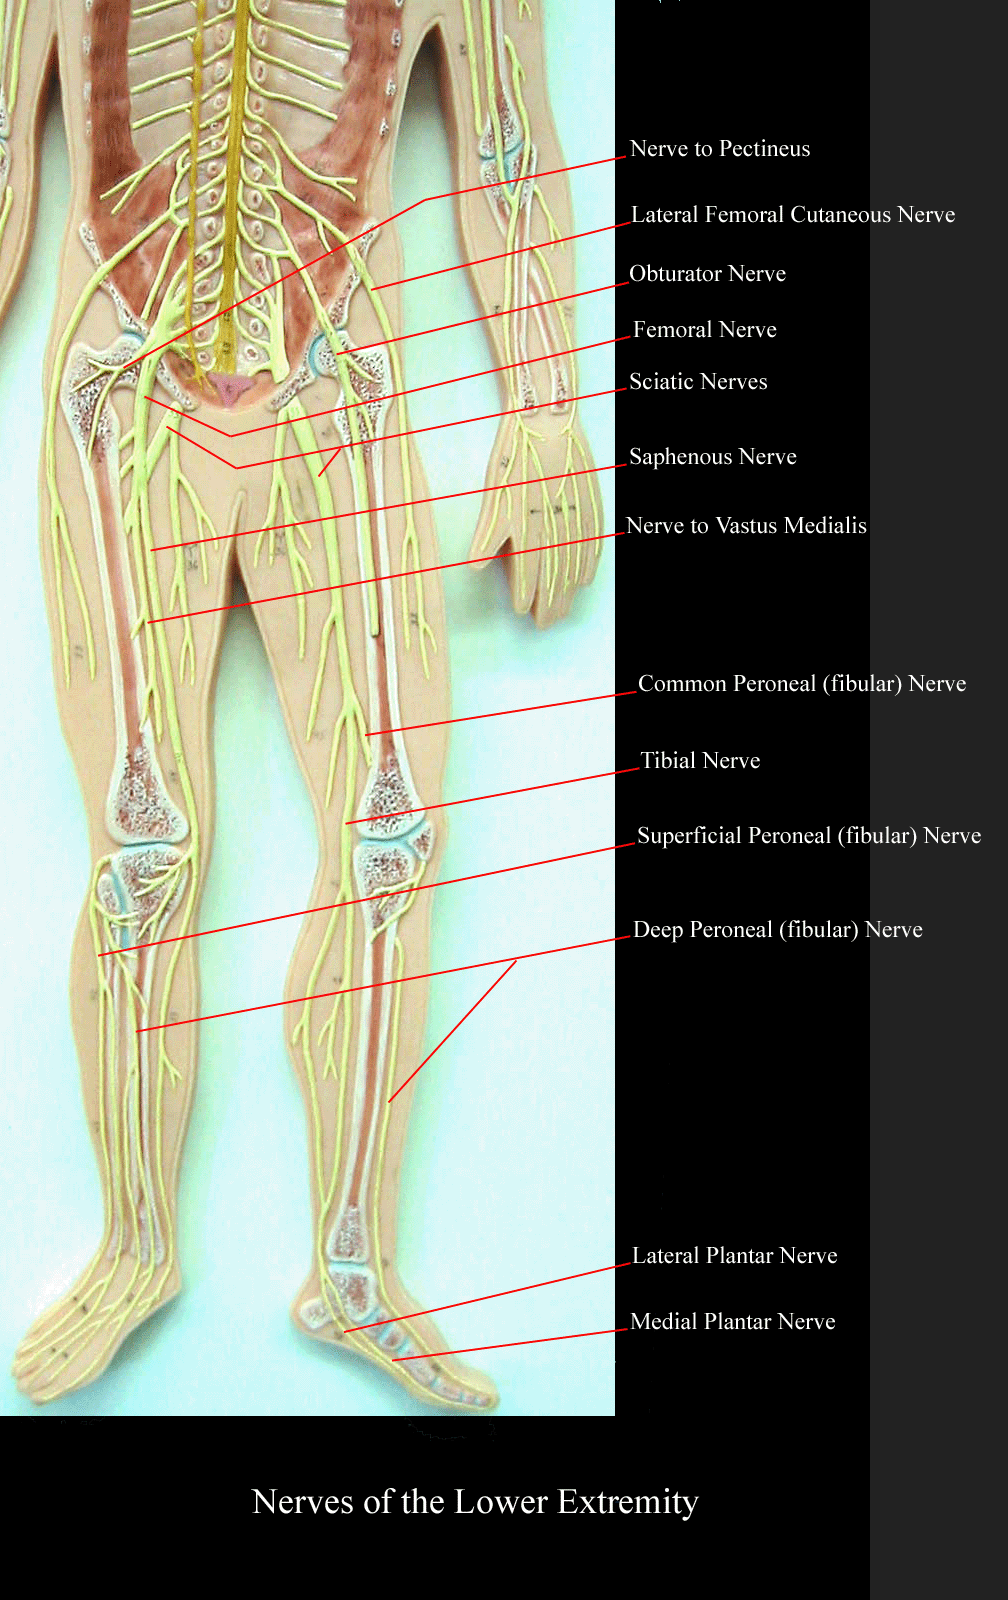 a labeled picture of a nervous system plaque focusing on the nerves of the lower extremity